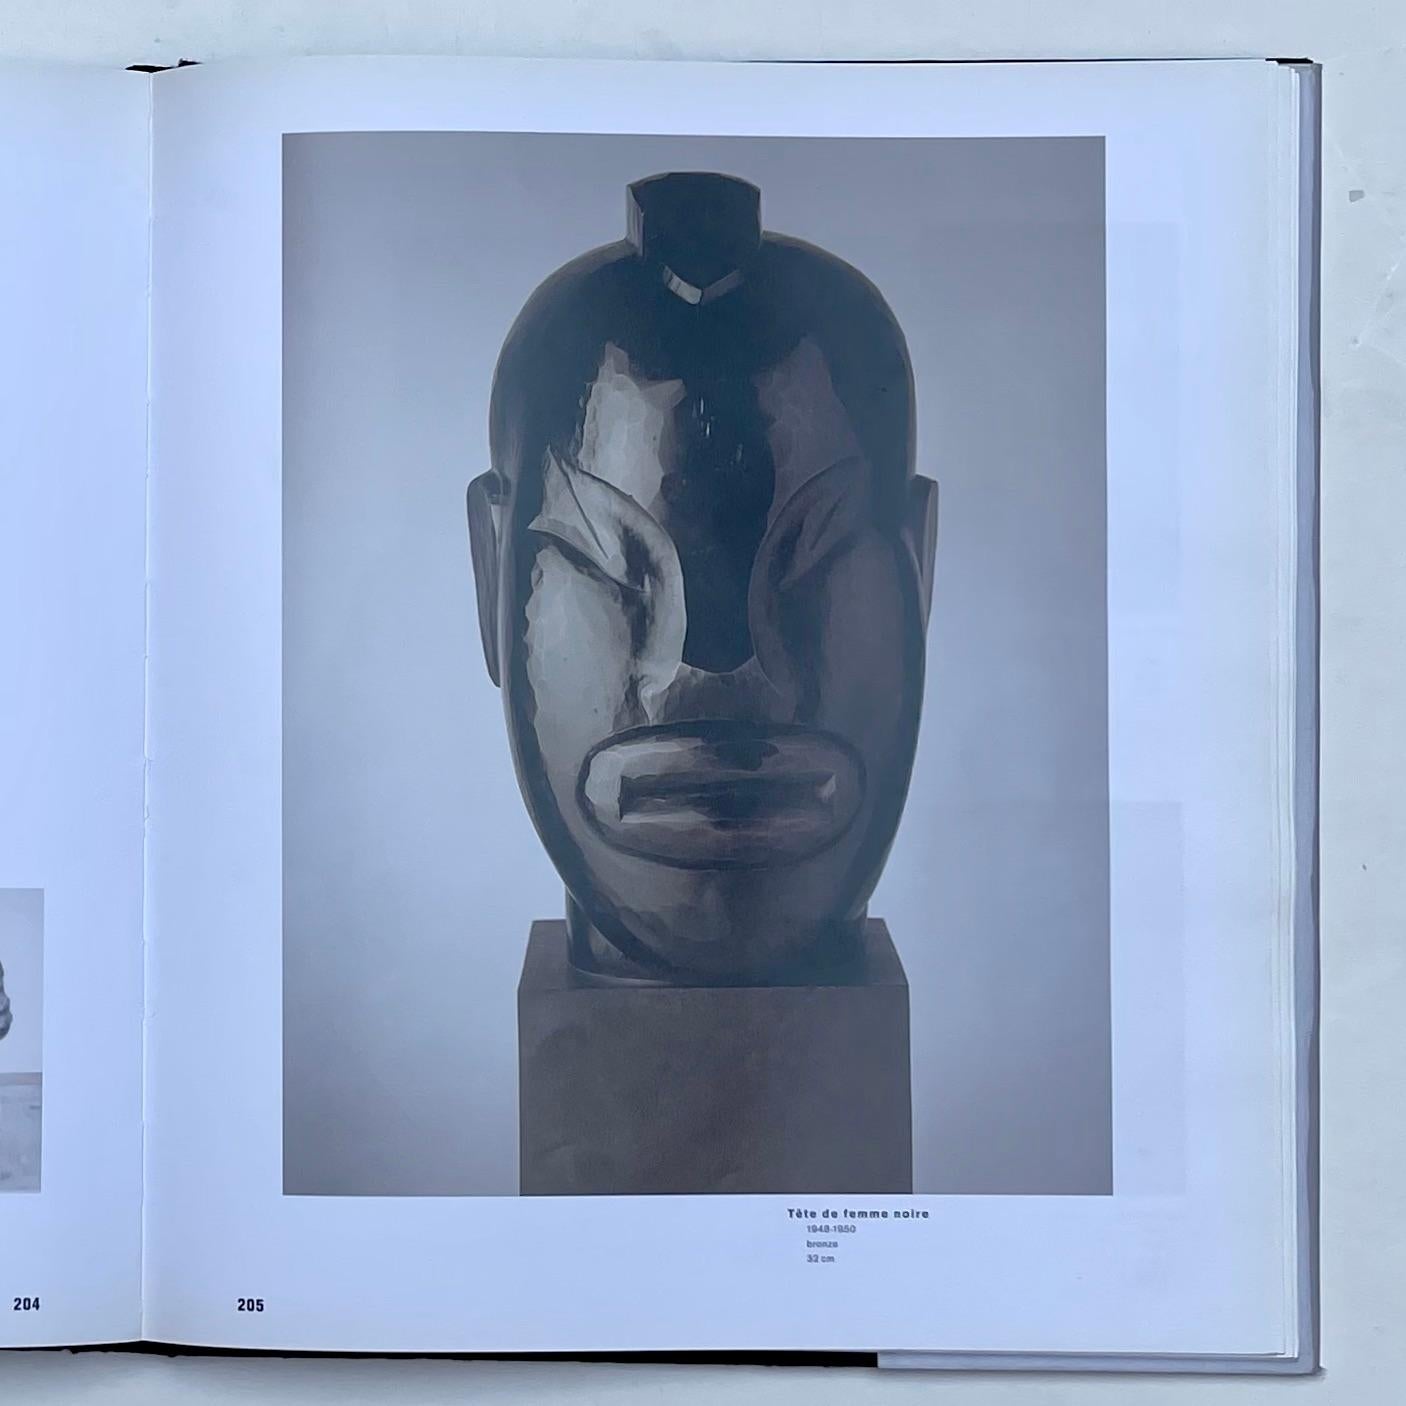 Ferdinand Parpan L'Intuition des Formes 
by Jean Charles Hachet
Published by Somogy Editions, 2001.

A comprehensive look at Ferdinand Parpan's work and life. Parpan became intrigued by the aesthetics of religious art and the veneration it